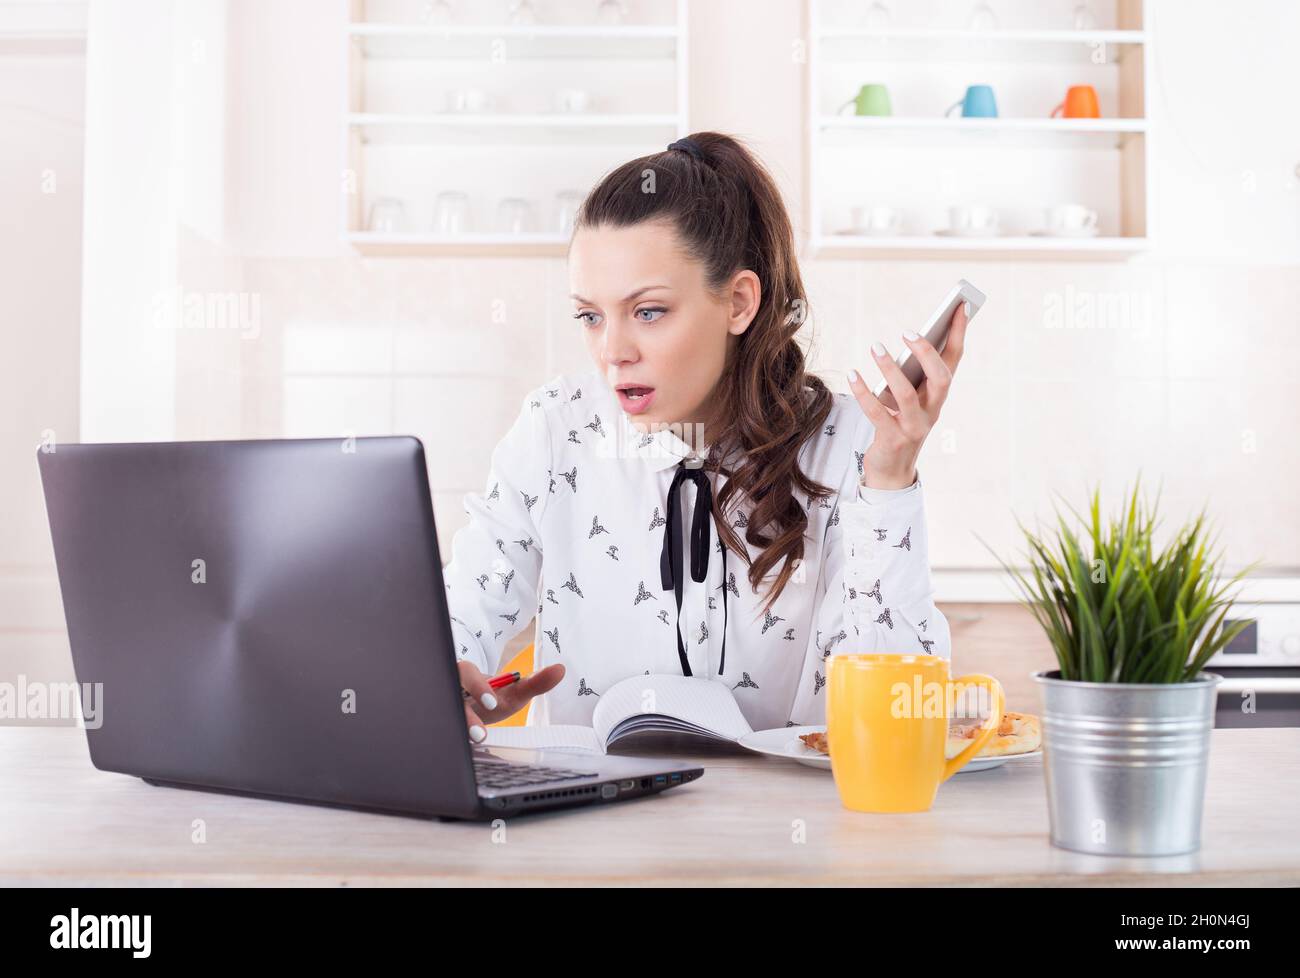 Shocked young woman holding mobile phone and looking at laptop. Busy girl working from home Stock Photo